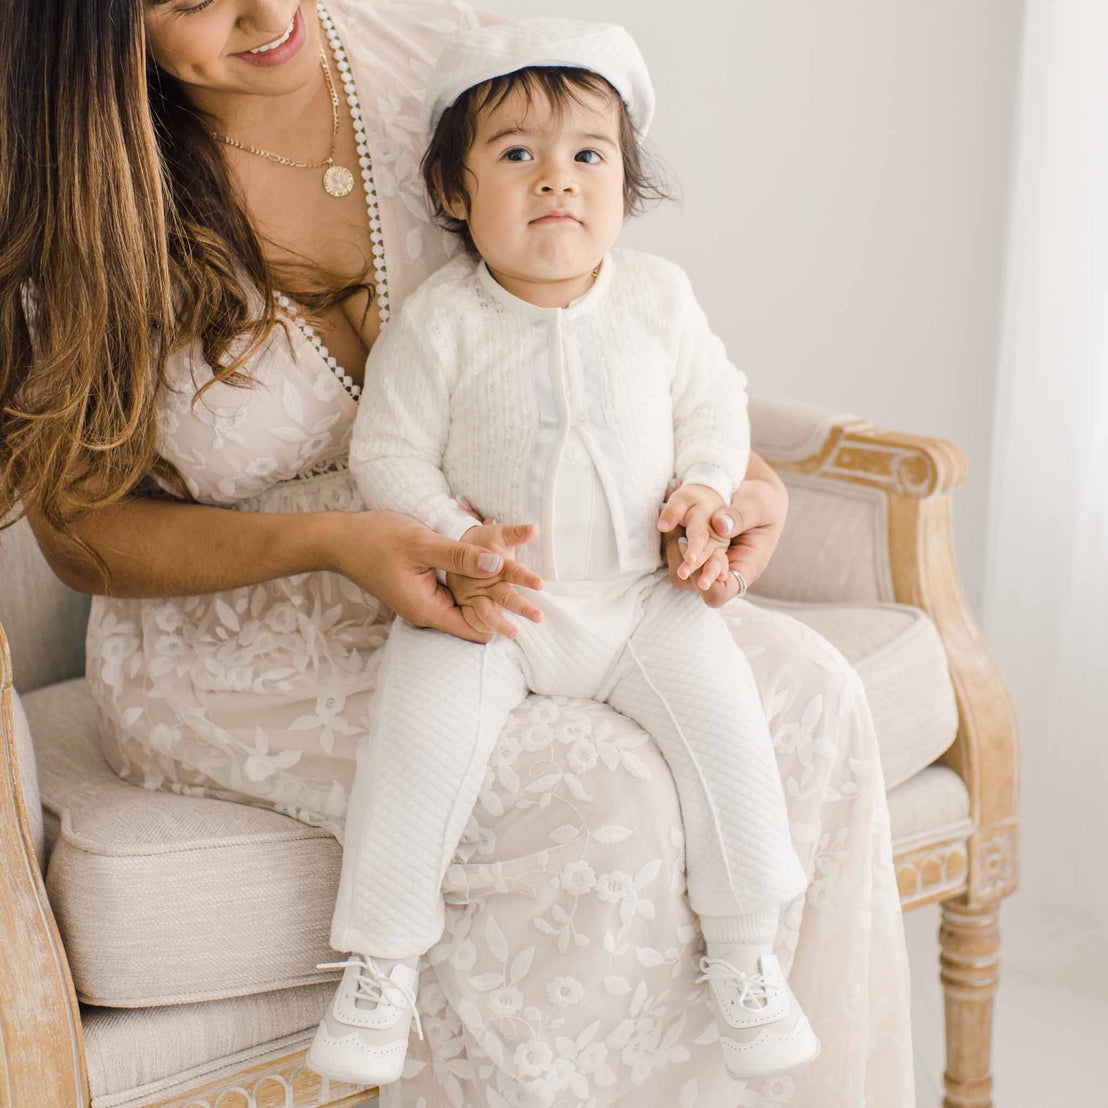 Baby boy sitting on the lap of his mother. He is wearing the Owen 3-Piece Suit, including the sweater, pants, and onesie